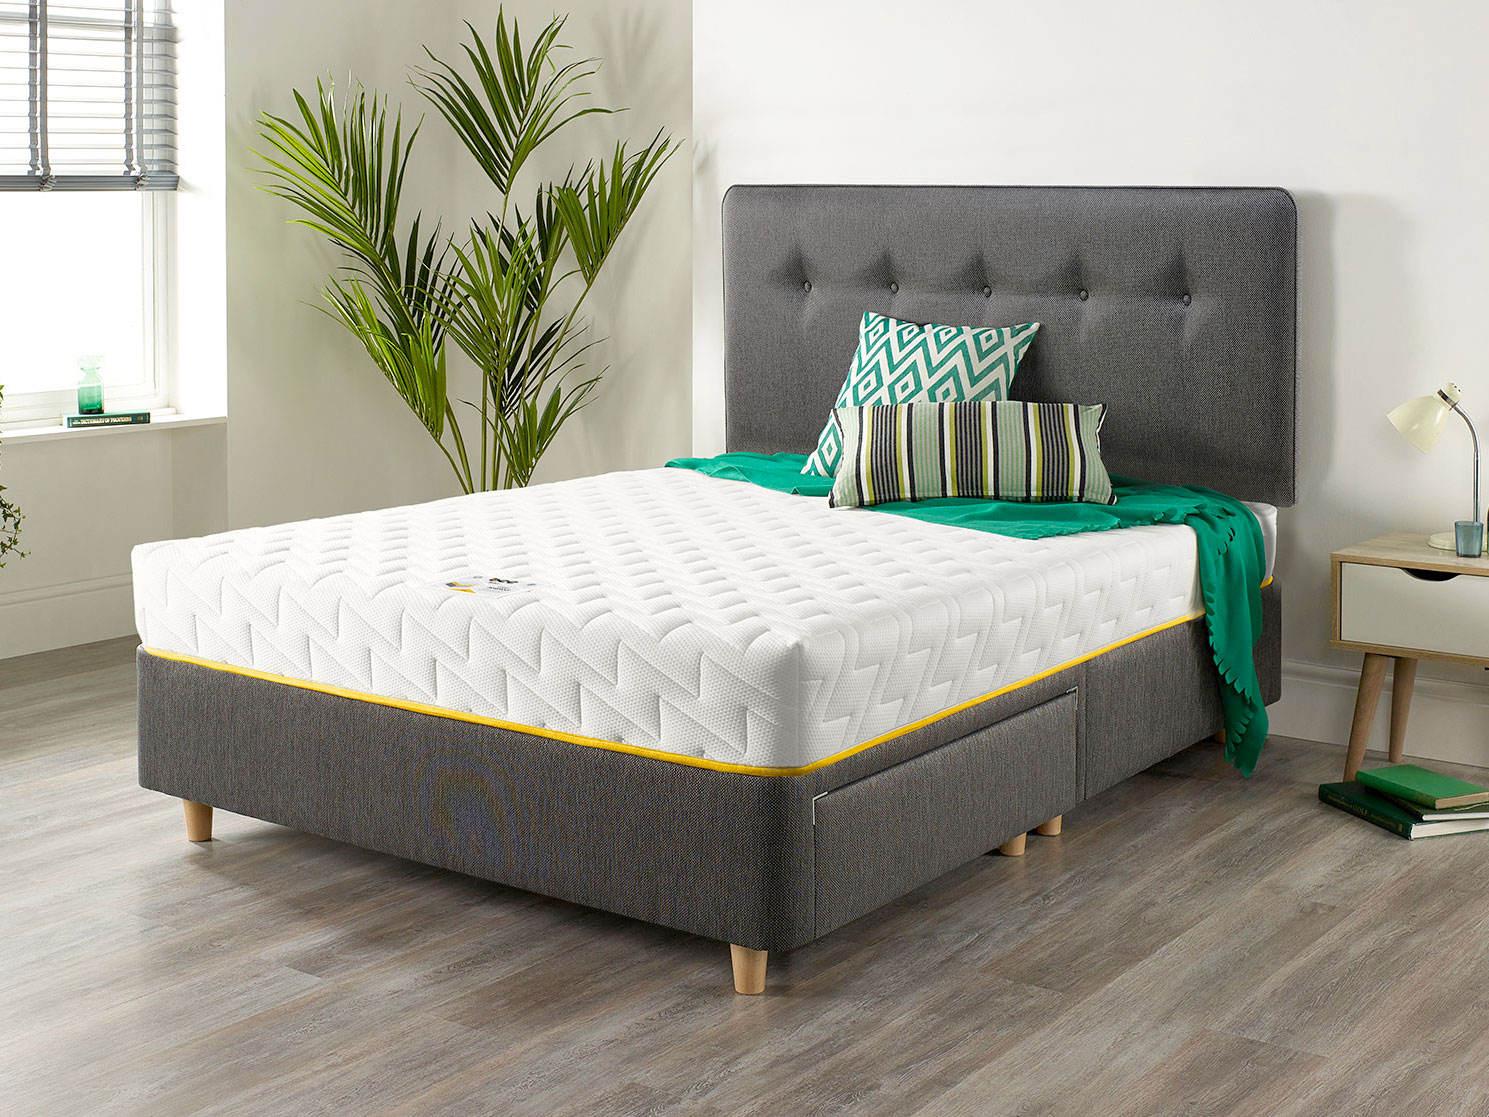 6ft Super King Size Relyon Bee Relaxed Mattress